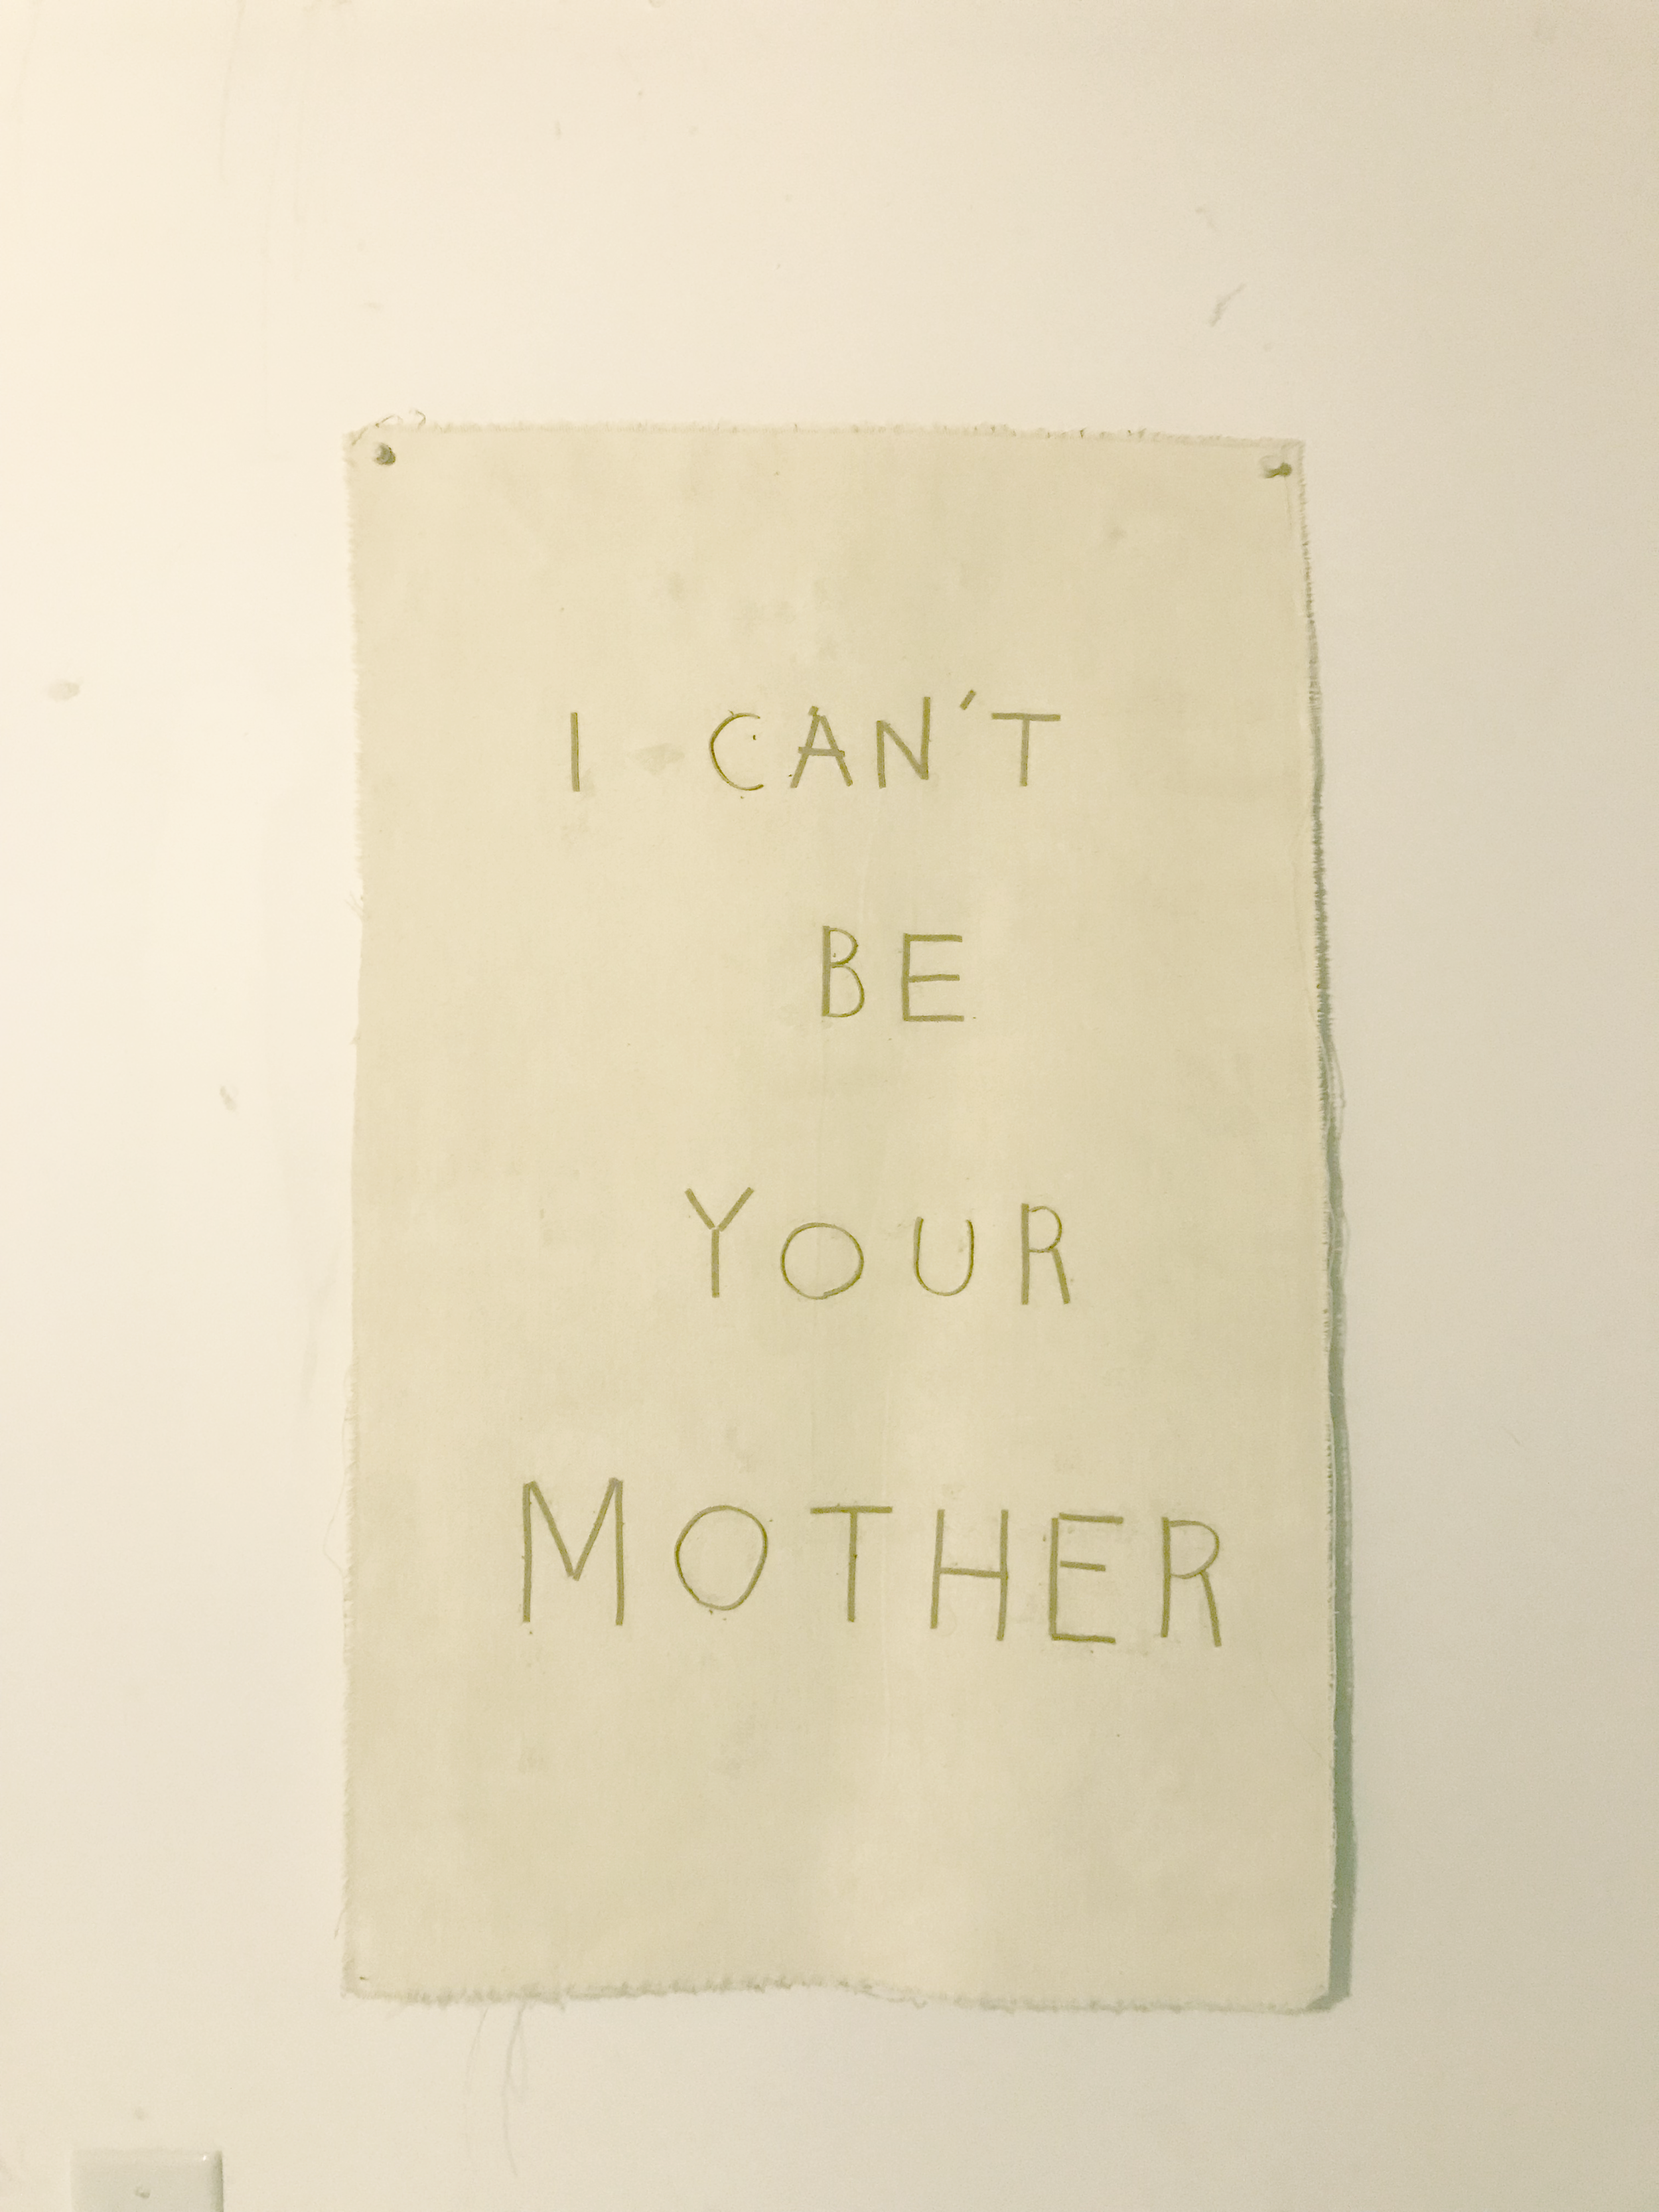 I can't be your mother, 2019